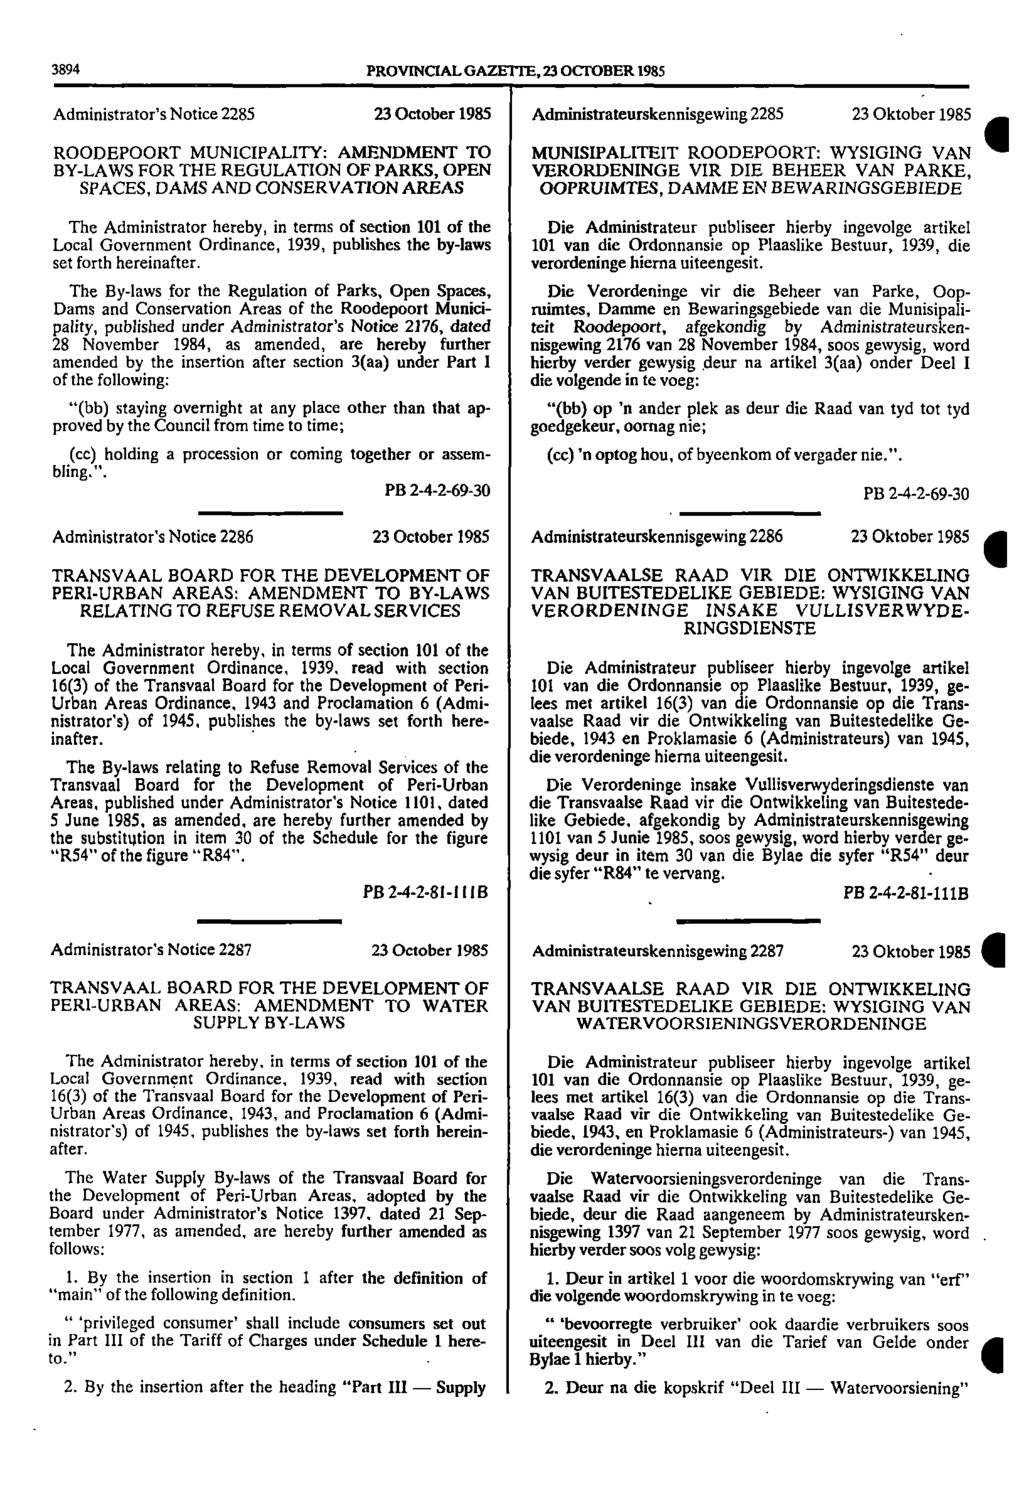 3894 PROVINCIAL GAZETTE, 23 OCTOBER 1985 Administrator's Notice 2285 23 October 1985 Administrateurskennisgewing 2285 23 Oktober 1985 ROODEPOORT MUNICIPALITY: AMENDMENT TO BYLAWS FOR THE REGULATION